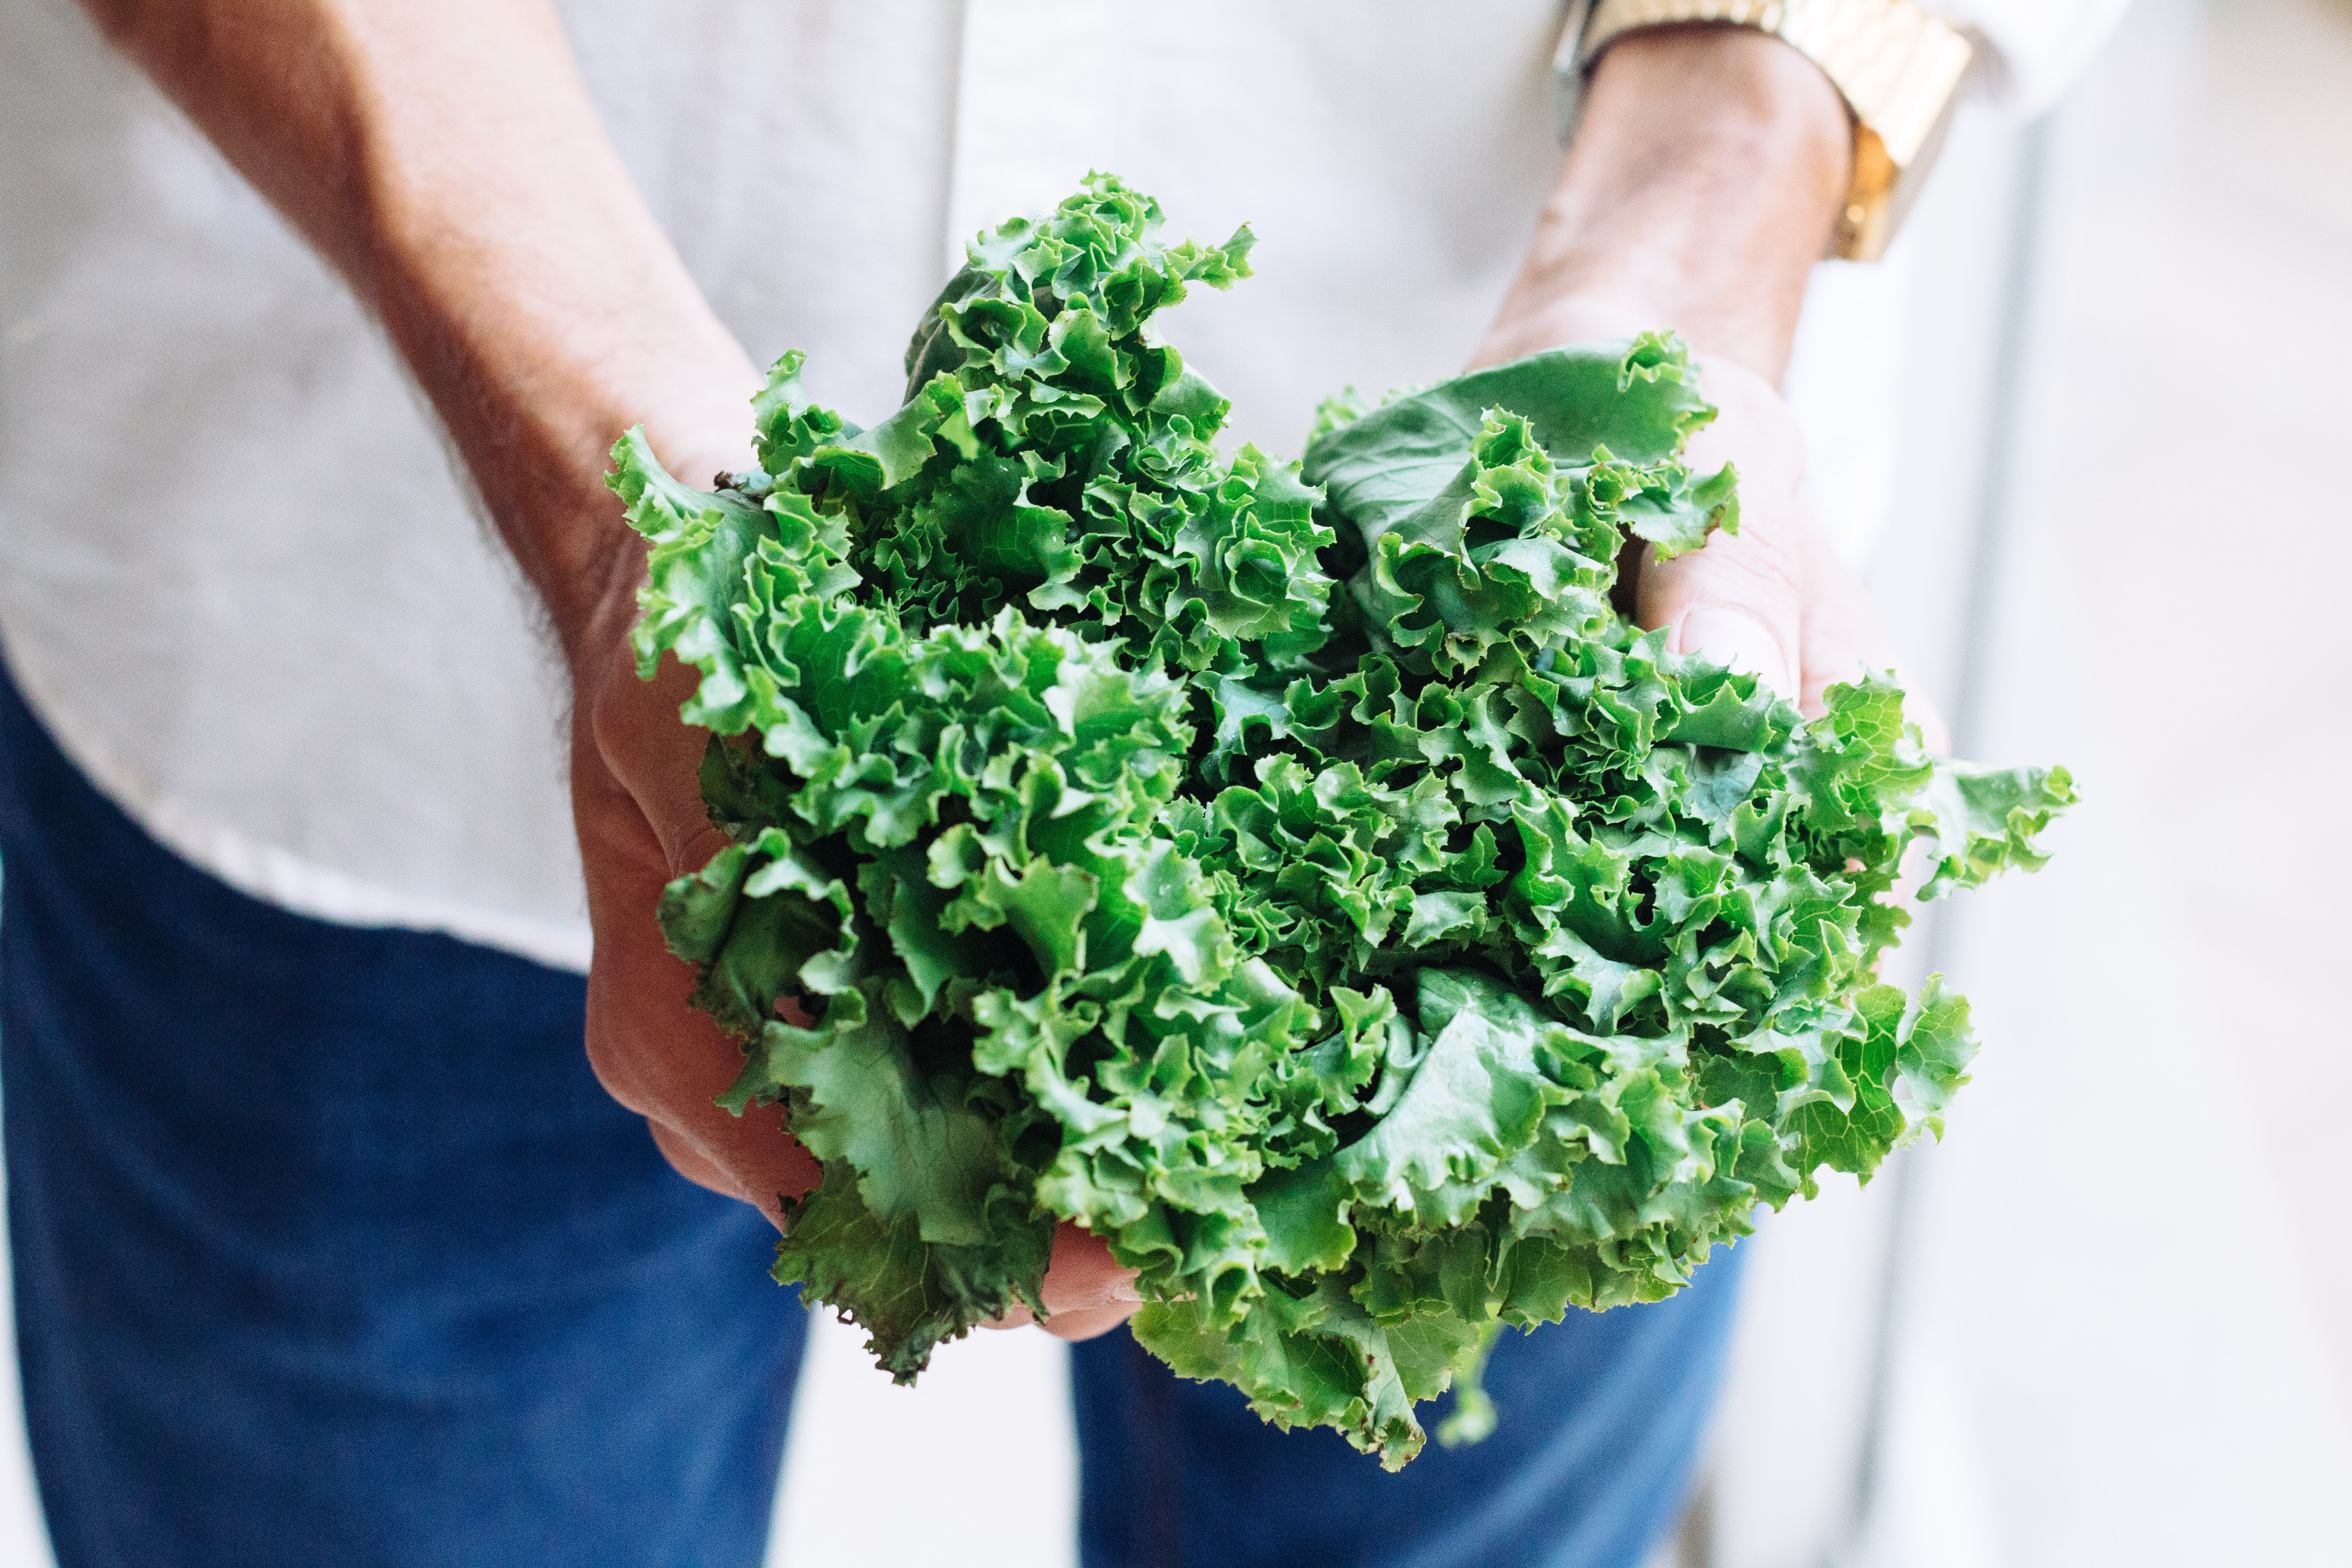 A person holding a bunch of fresh, green kale.